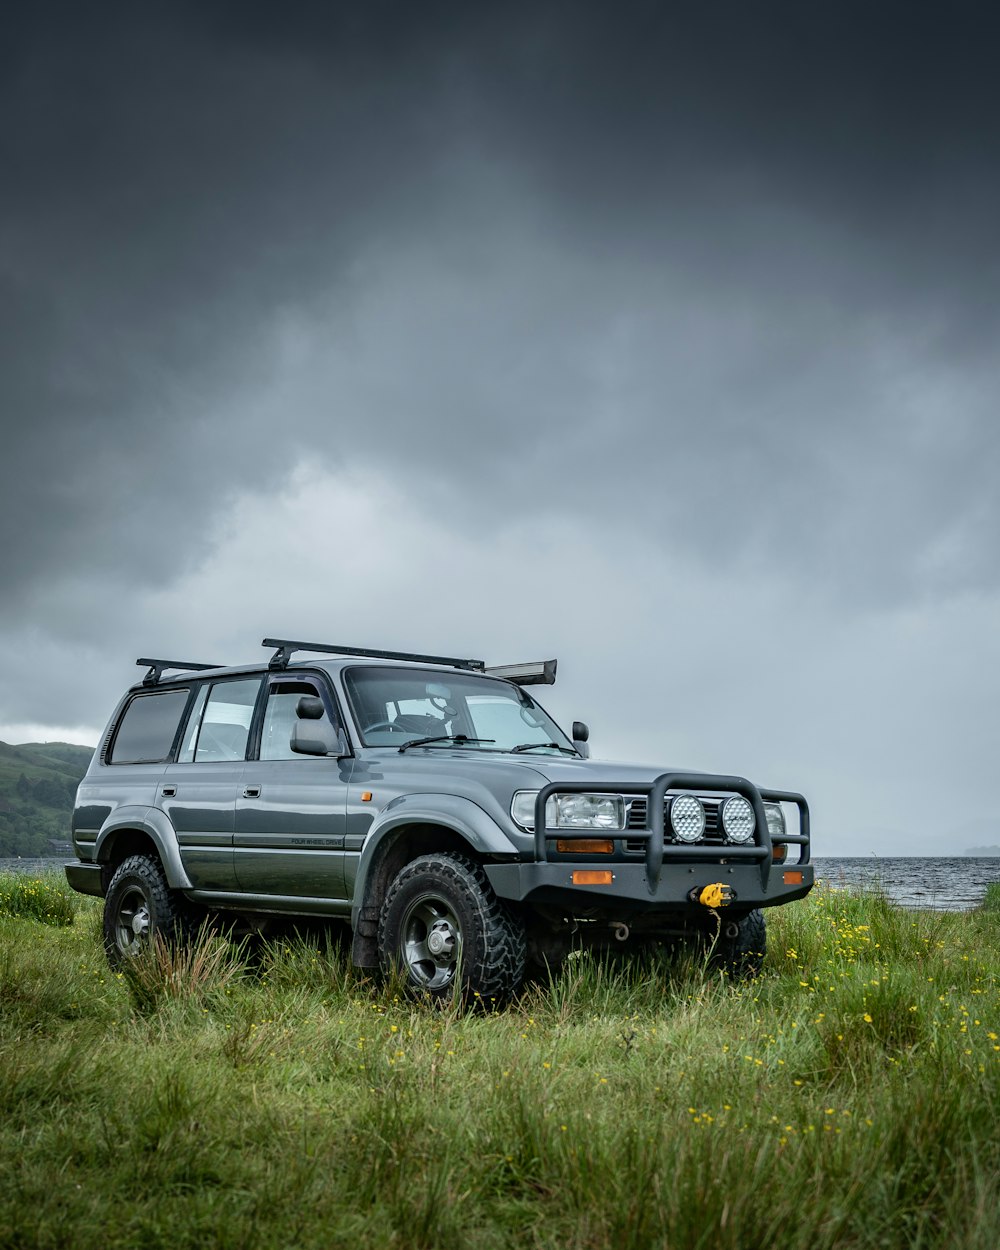 a vehicle parked in a field with a dark sky in the background